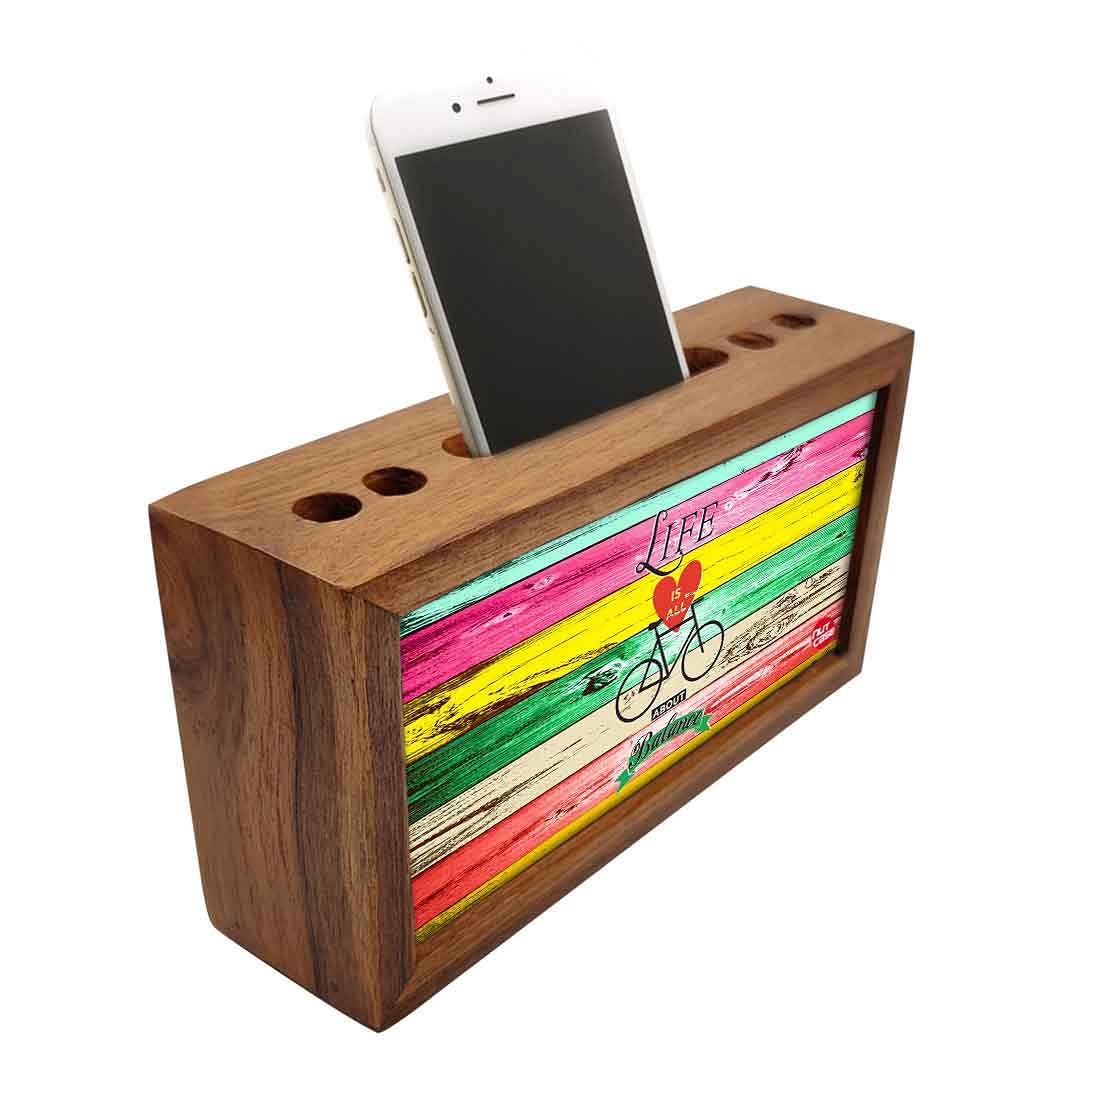 Wooden desk organizer  - Life Is All About Balance Nutcase